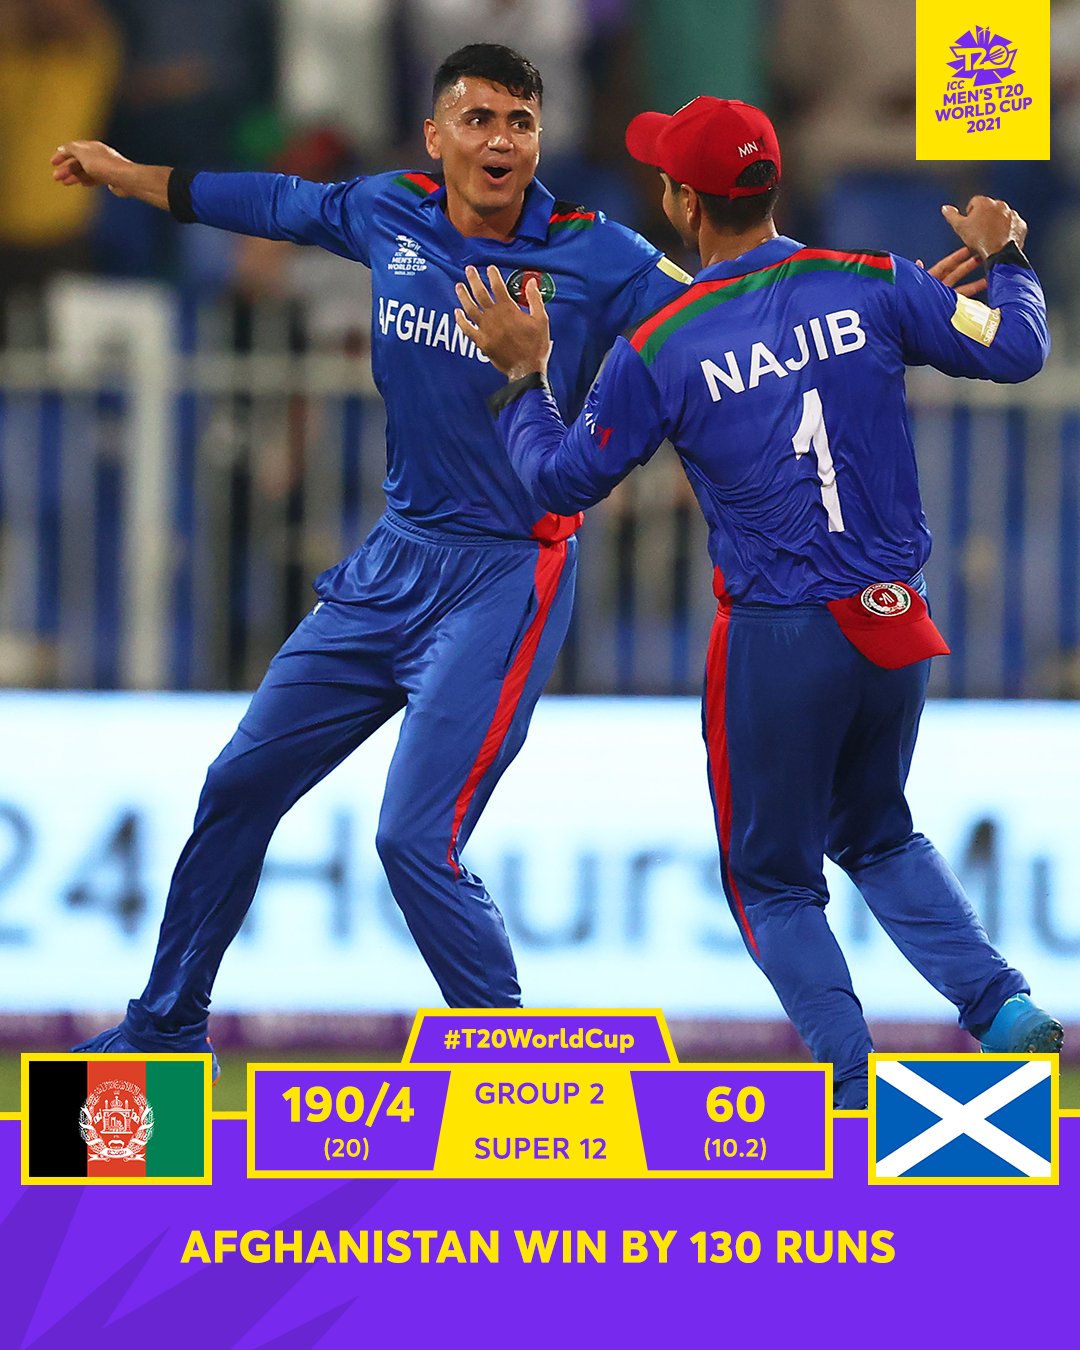 Sharjah T20 World Cup Afghanistan defeated Scotland.